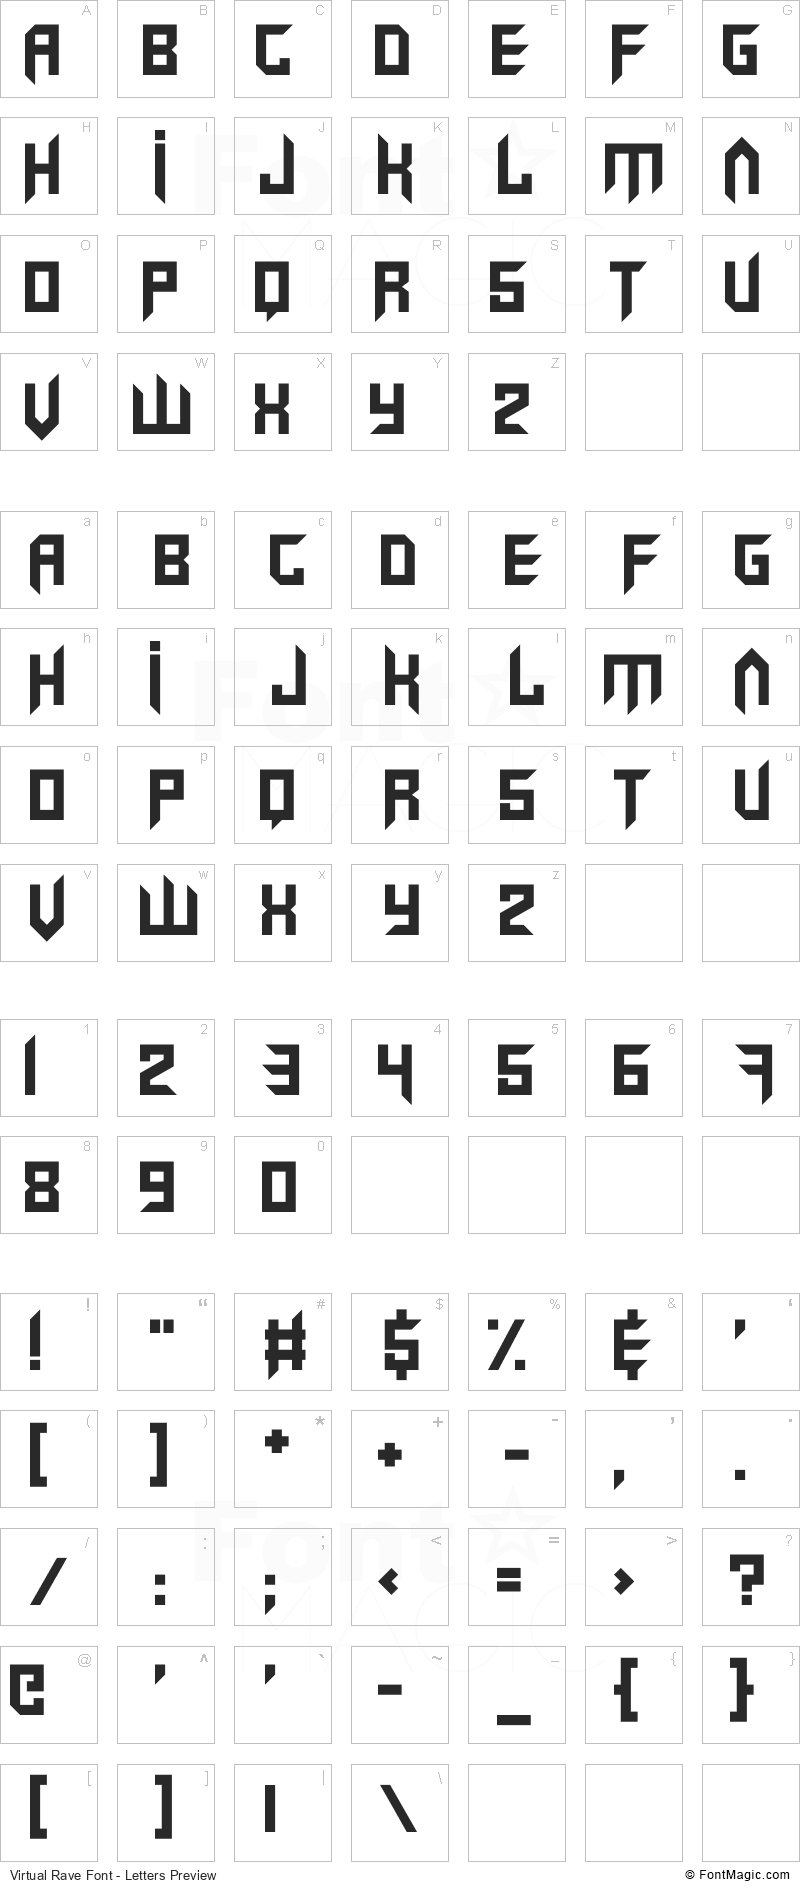 Virtual Rave Font - All Latters Preview Chart